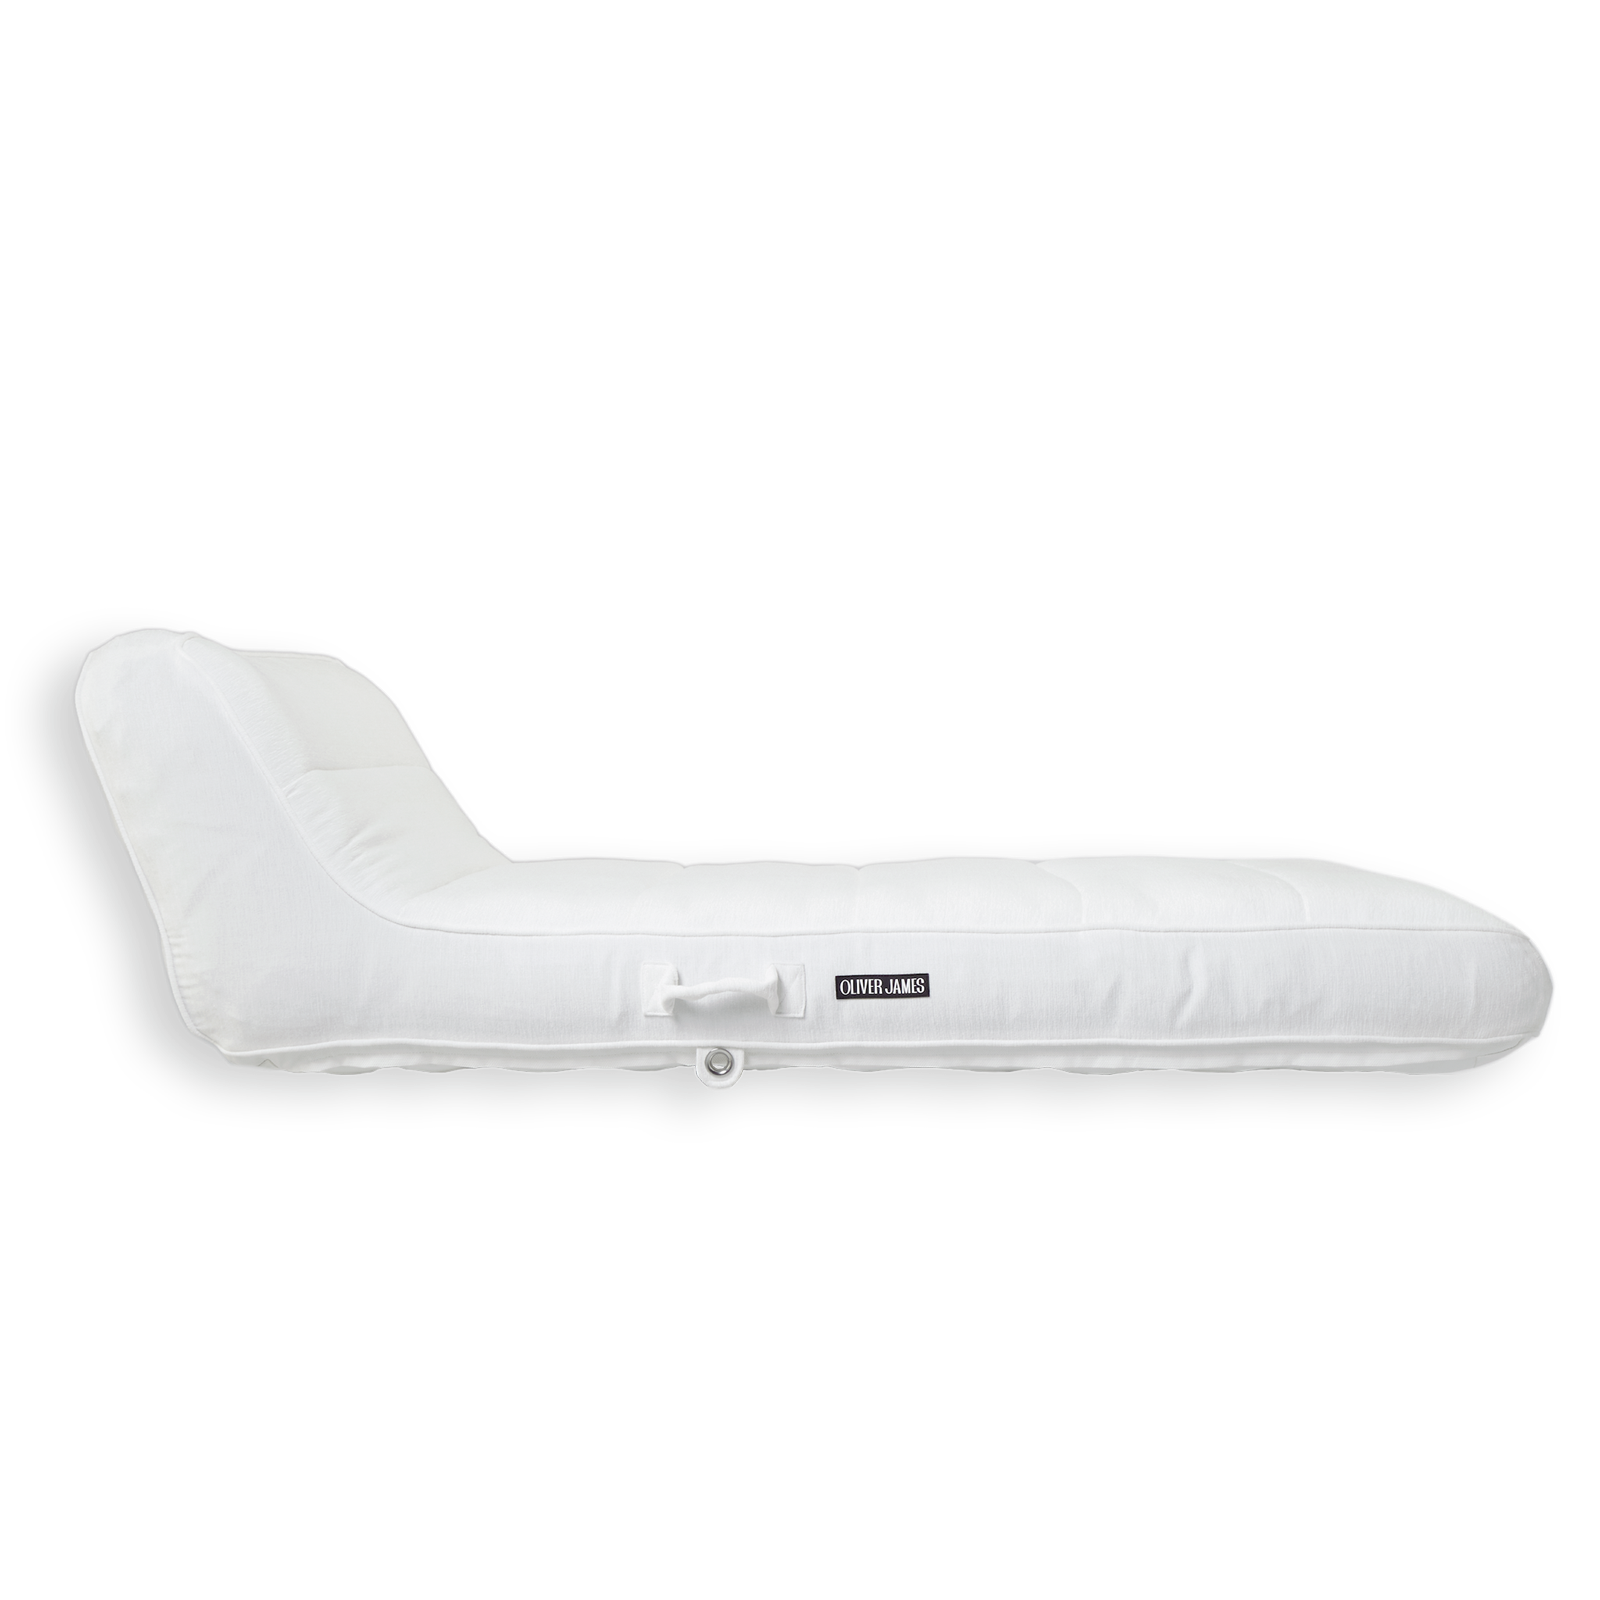 The side profile and backrest angle of a white terry toweled luxury pool float.